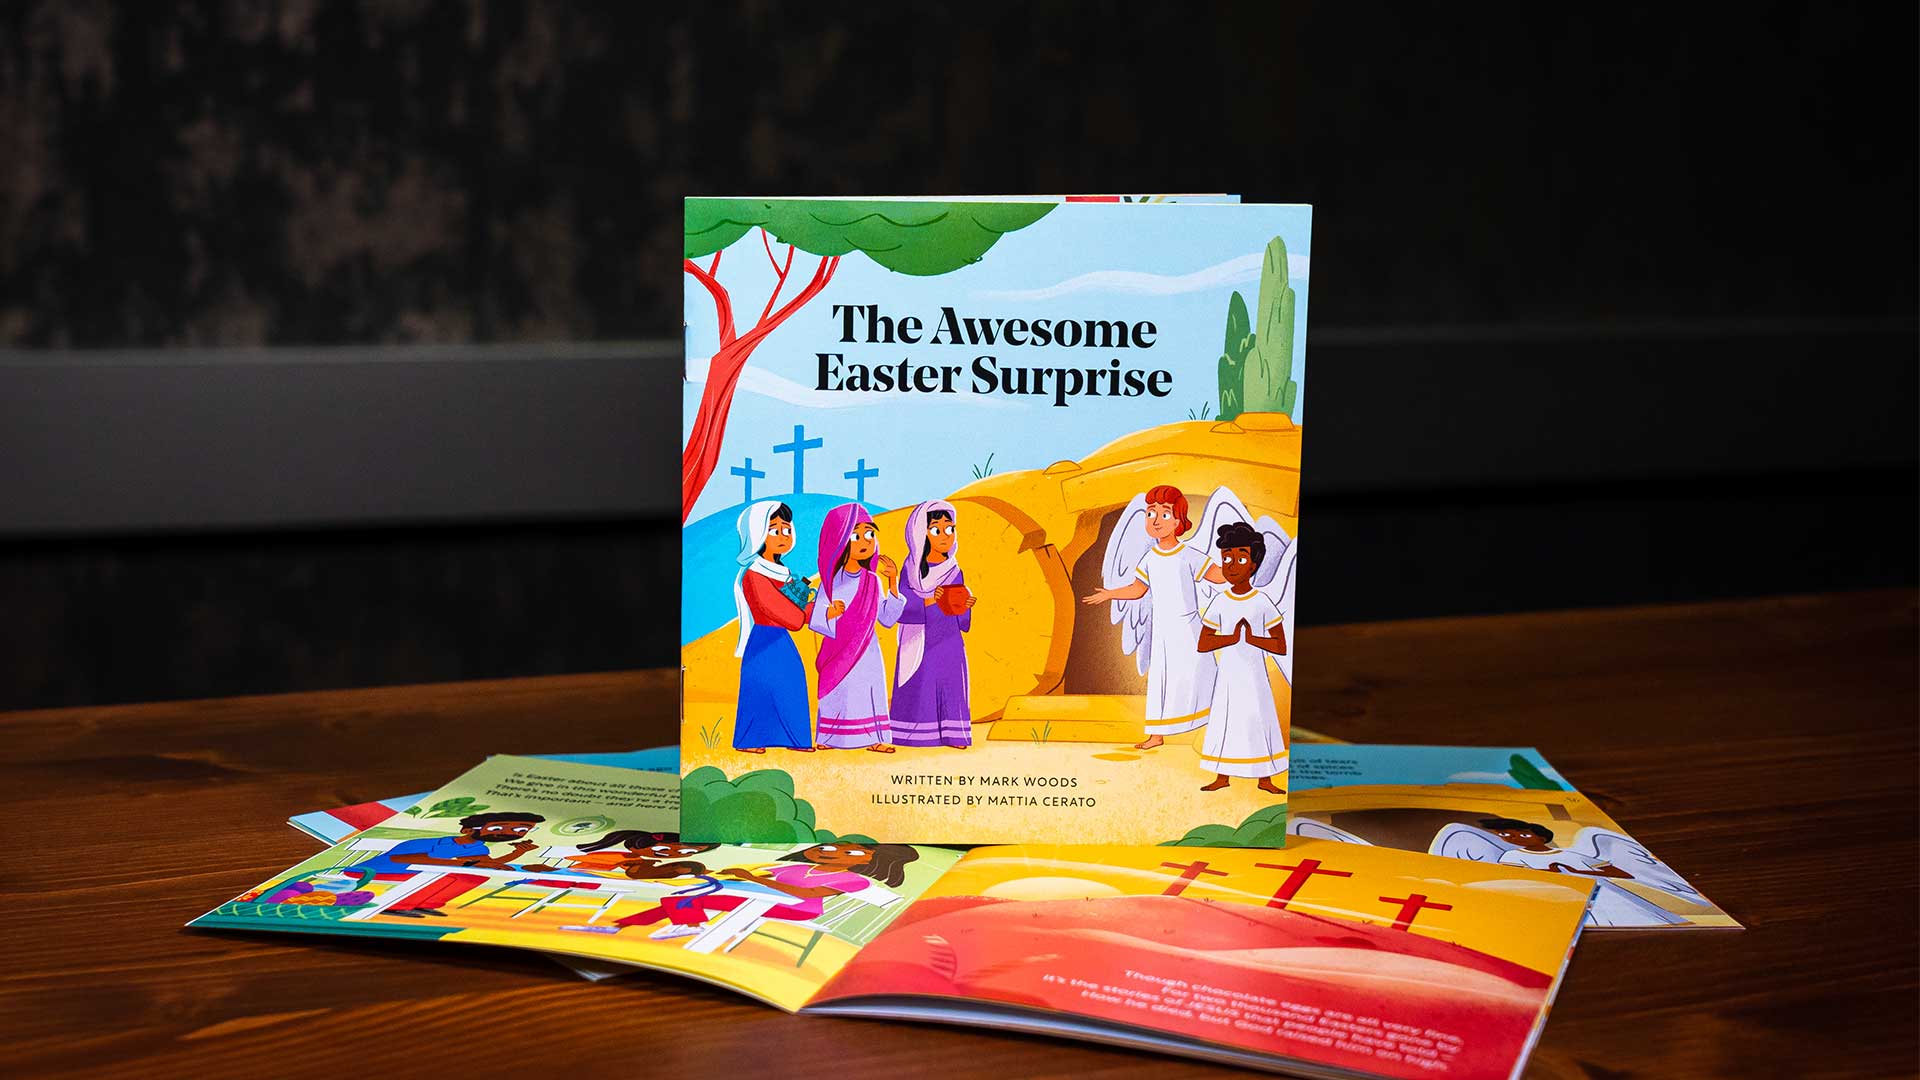 The Awesome Easter Surprise